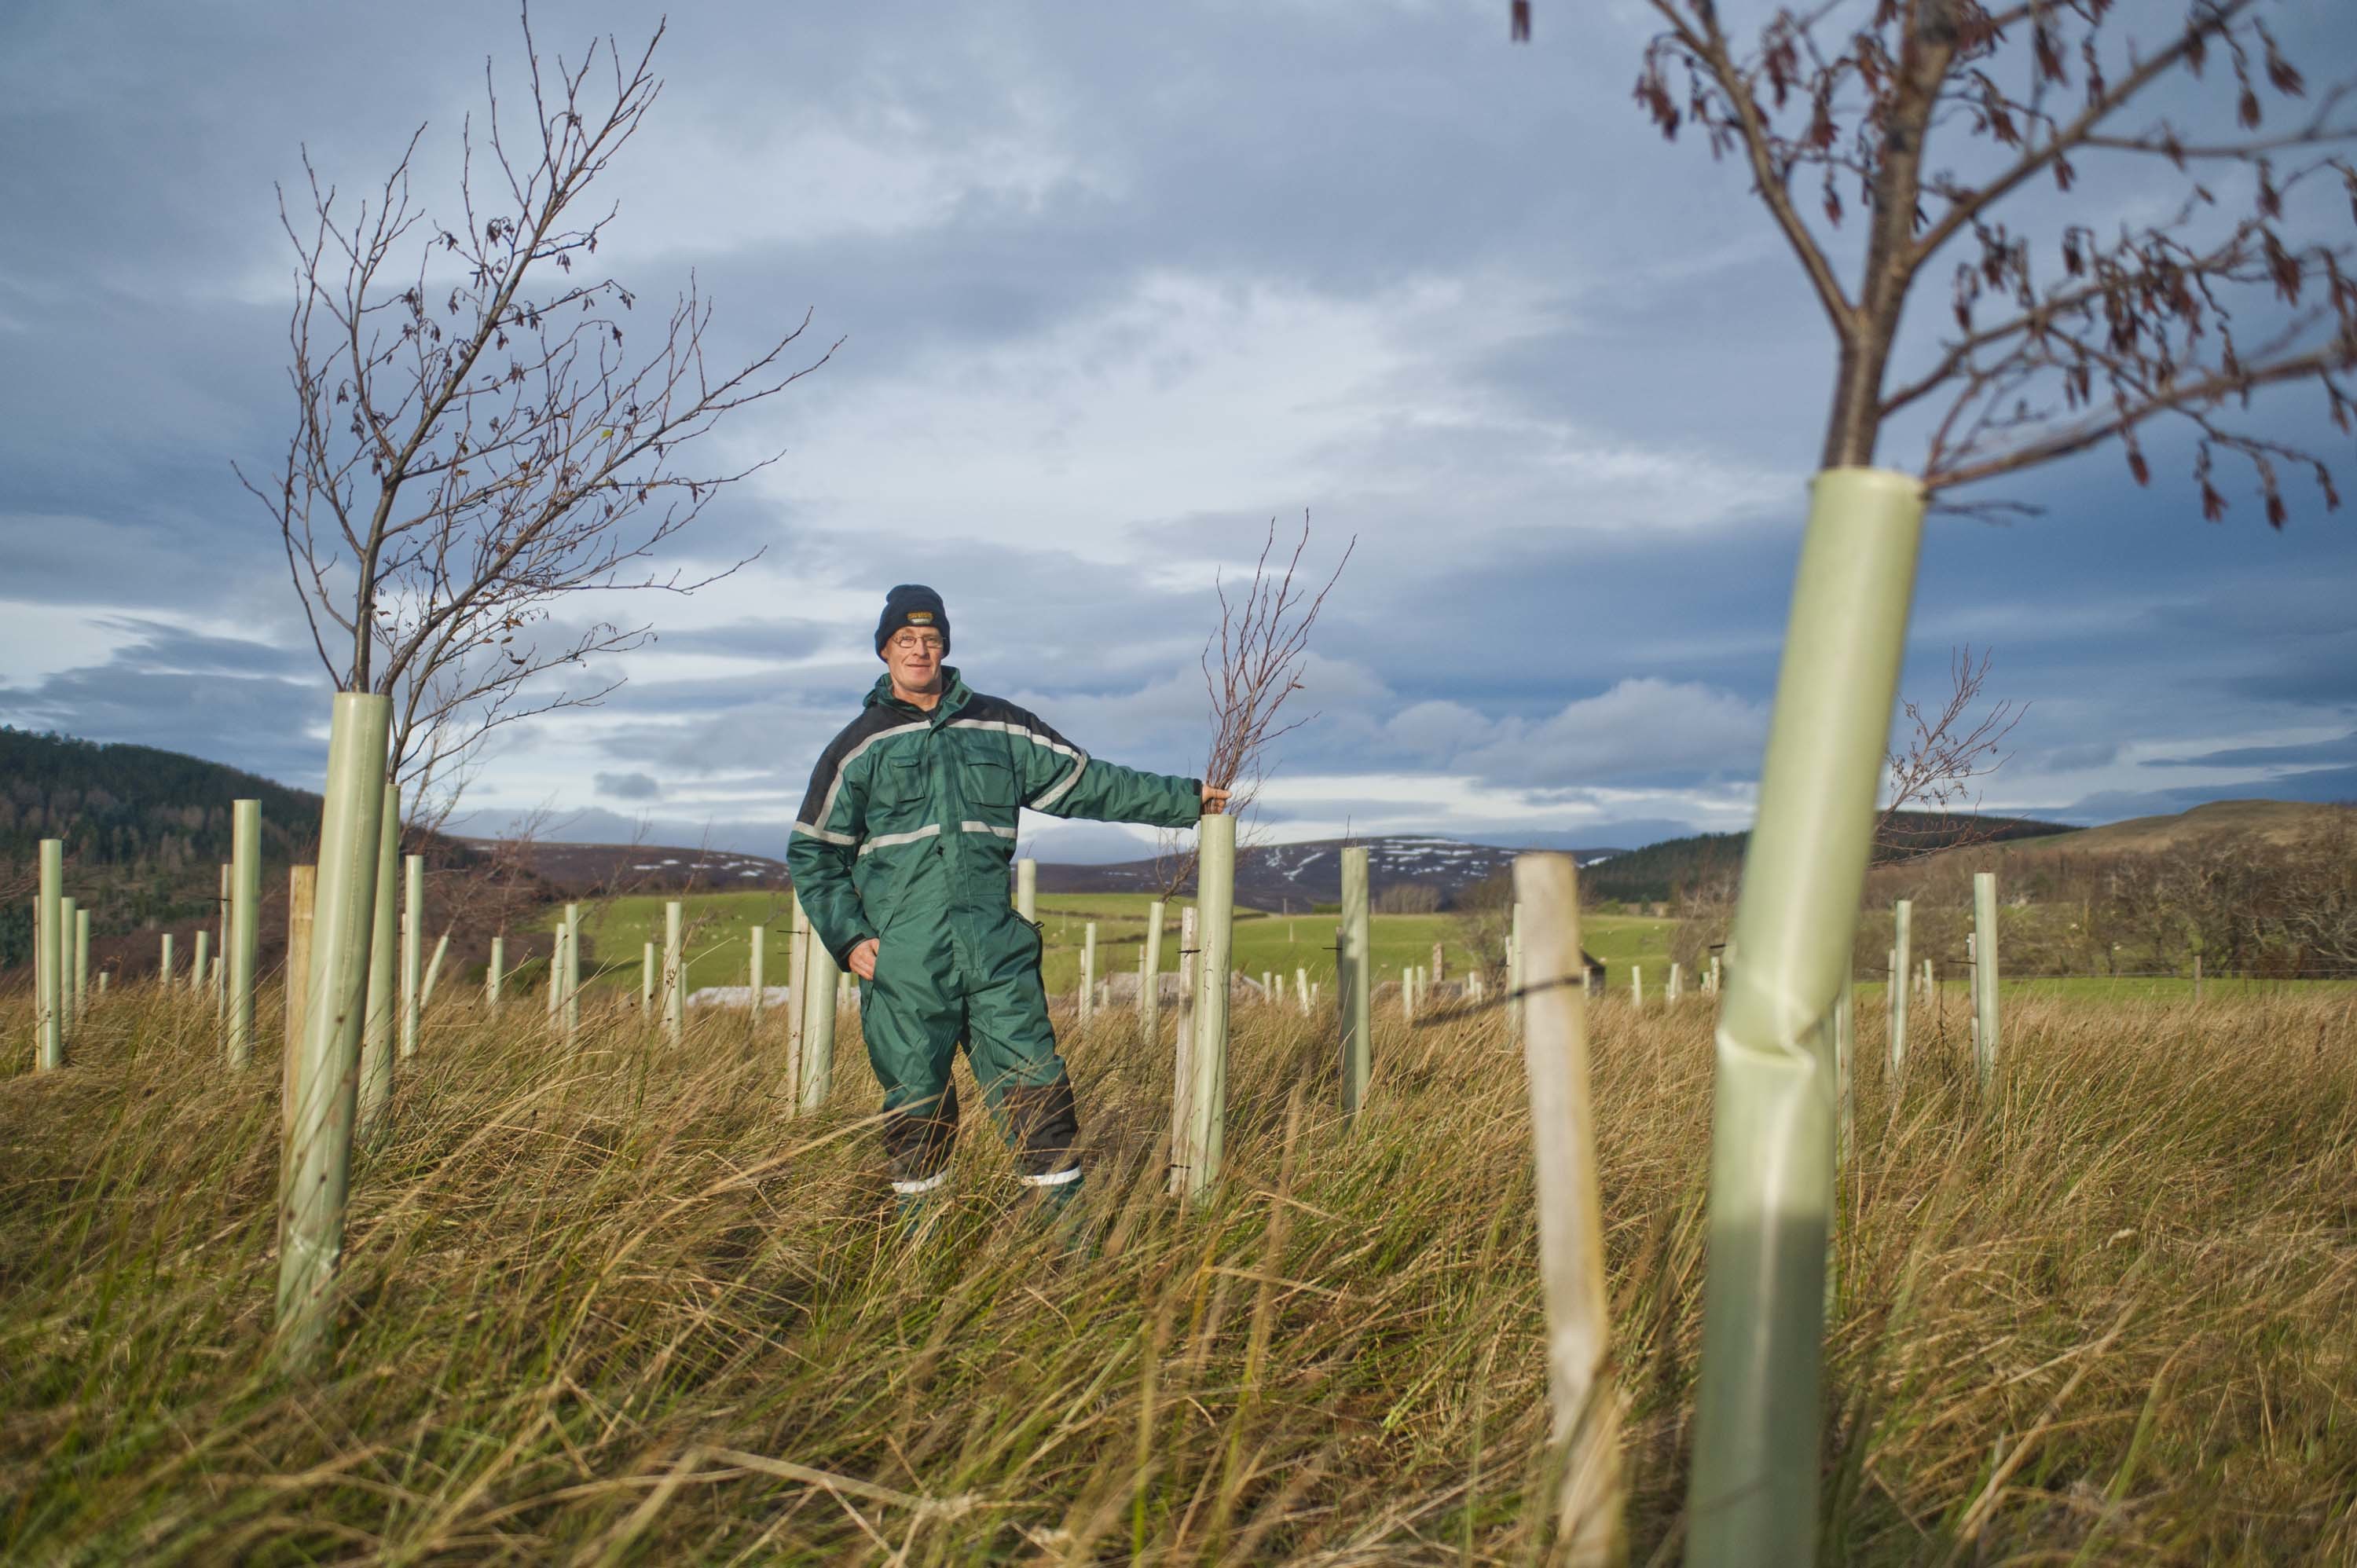 Jim Simmons won the RSPB's Nature of Scotland farming award for his conservation work